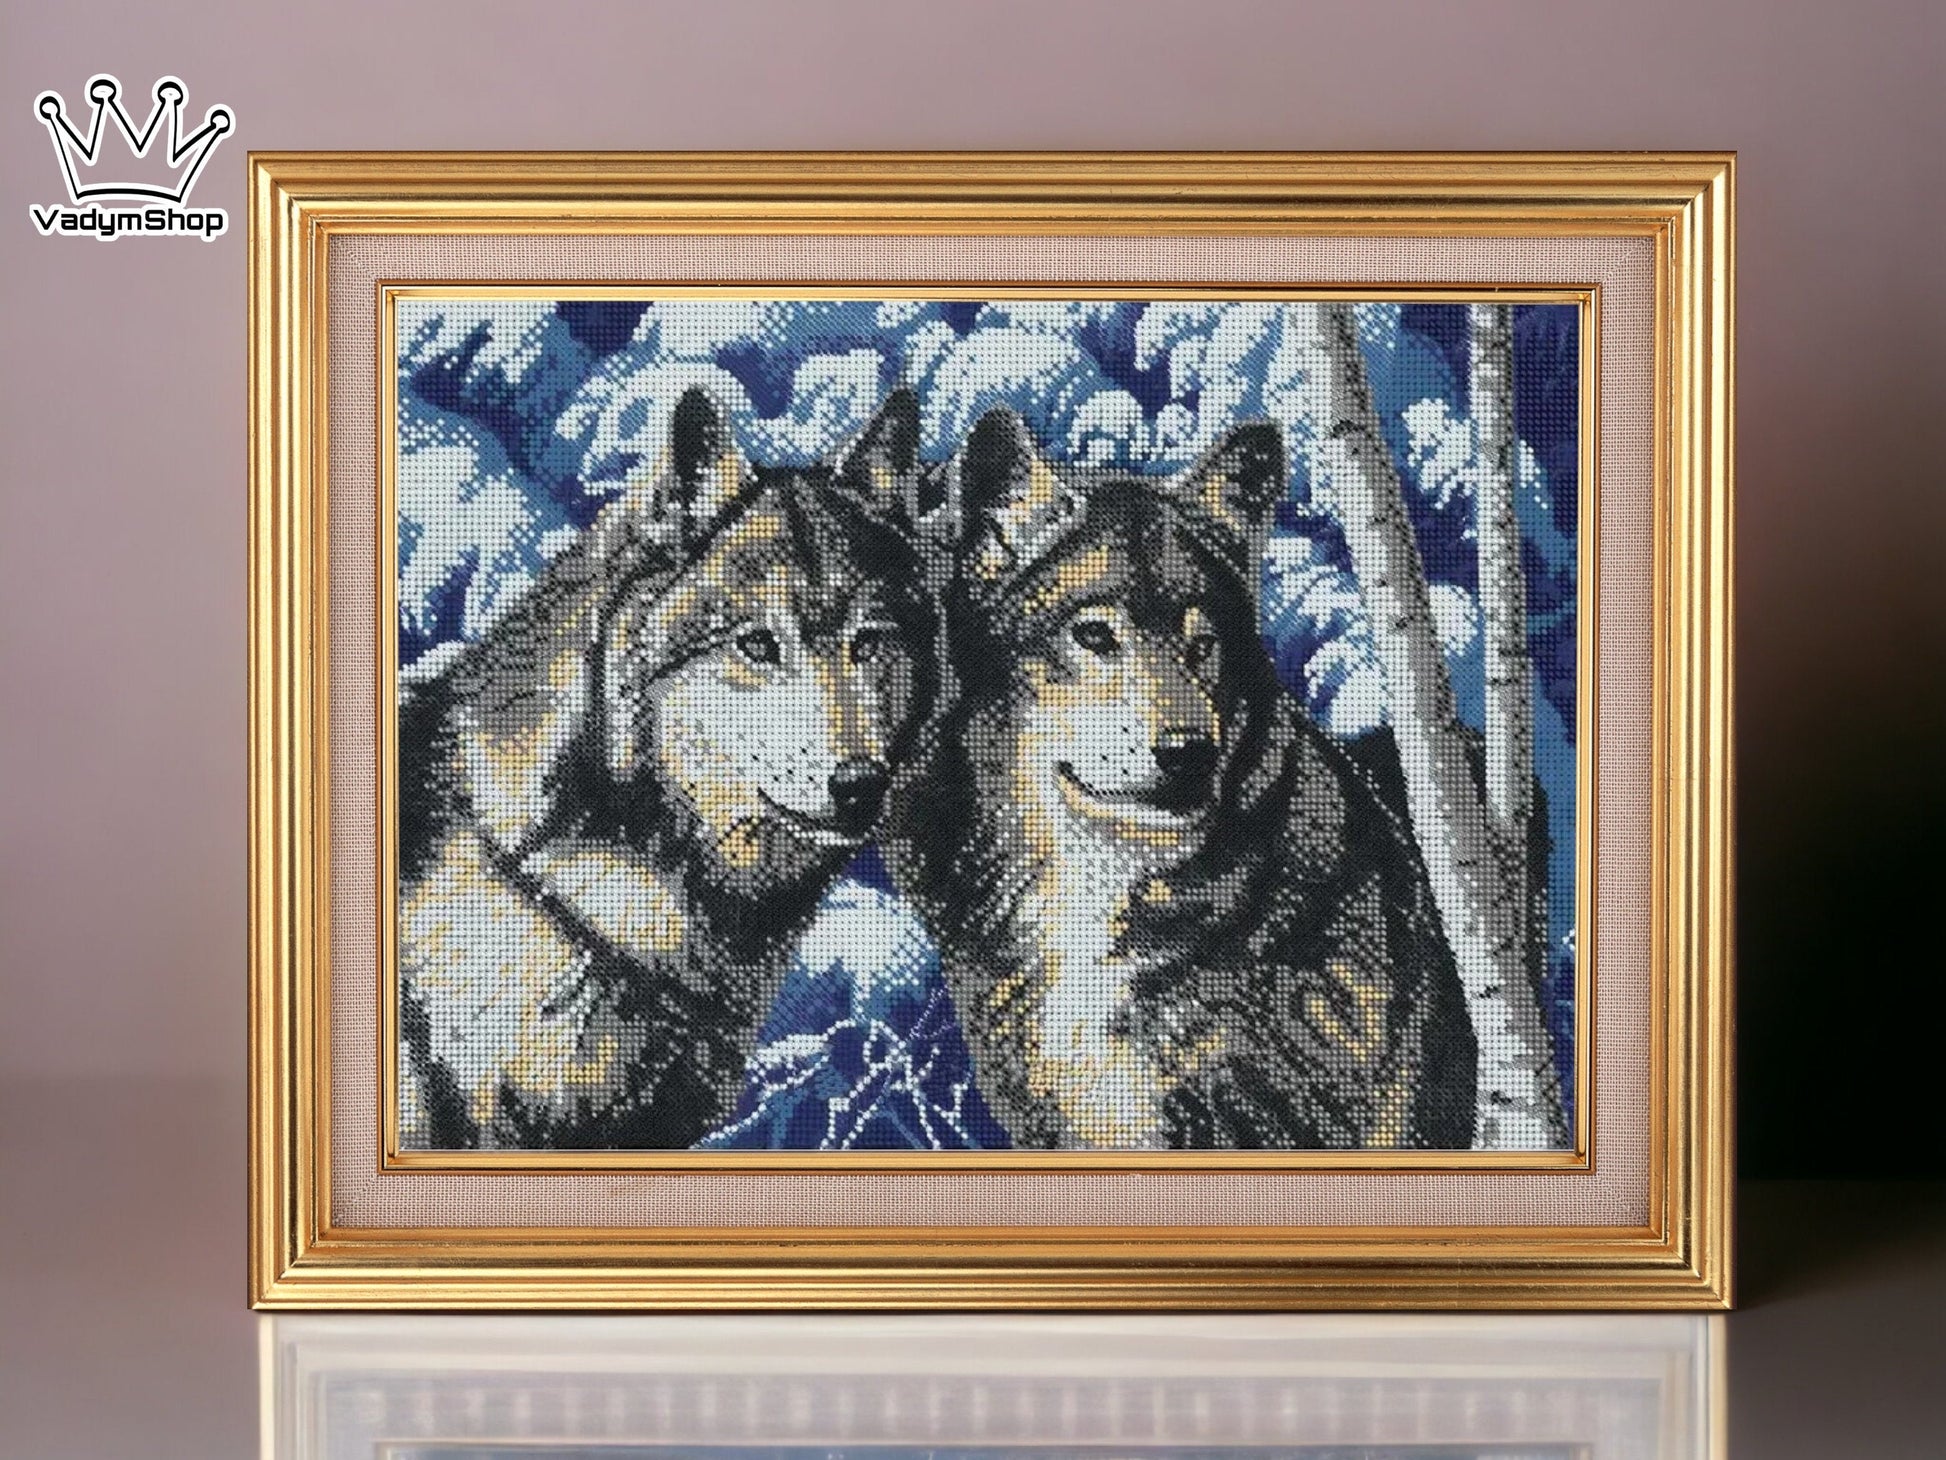 Wild and Beautiful: Wolves Bead Embroidery Kit for DIY Crafters Size: 14.6-10.2in (37.8-26.7cm) - VadymShop